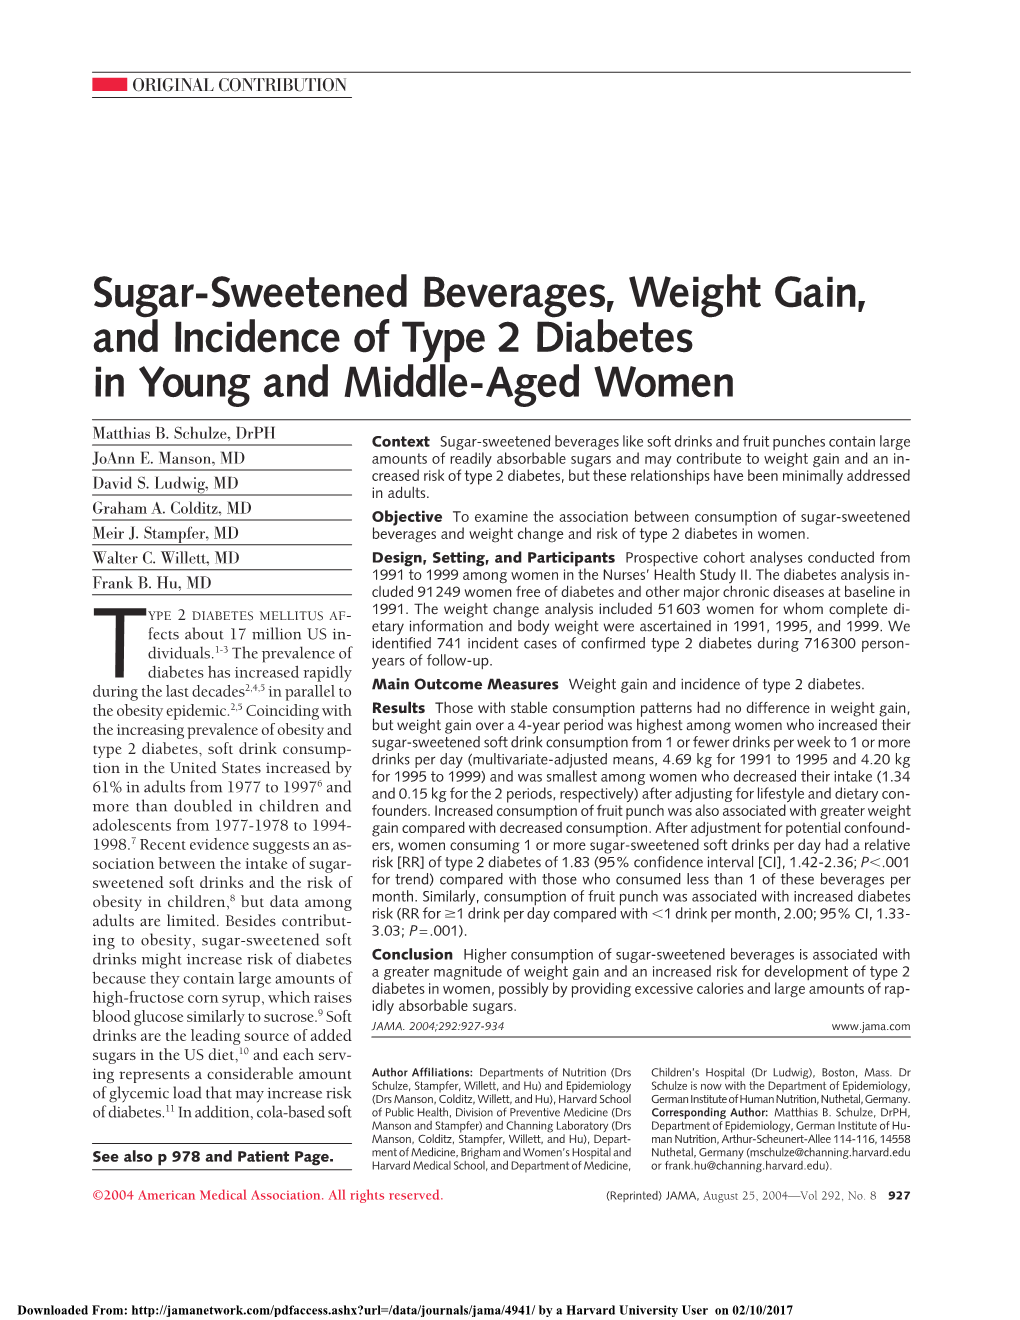 Sugar-Sweetened Beverages, Weight Gain, and Incidence of Type 2 Diabetes in Young and Middle-Aged Women